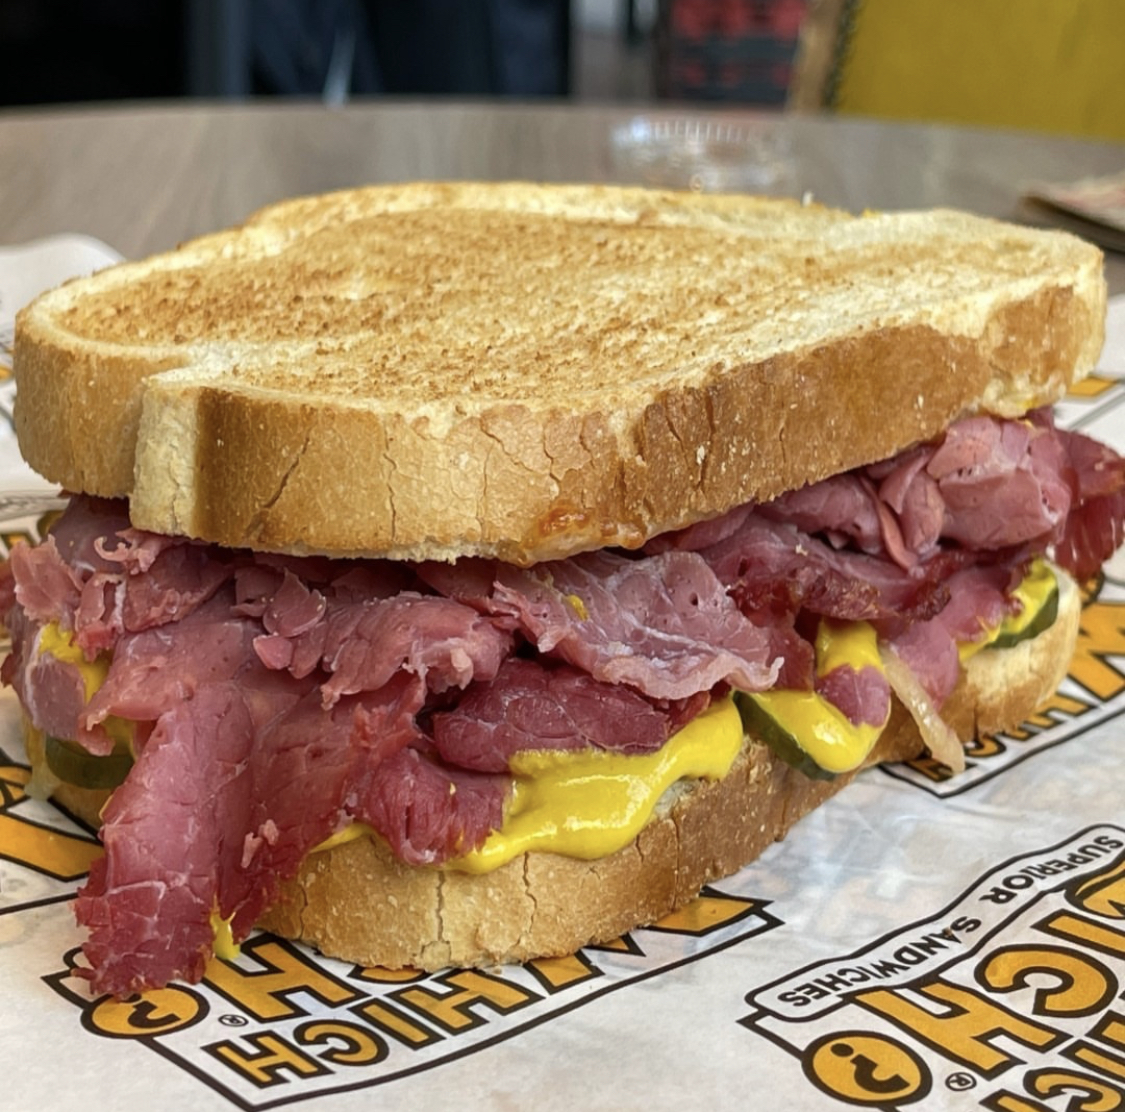 How do you turn a sandWICH into a legend? Just add a dash of salt beef, a dollop of mustard, a crunch of pickles, and tuck it all between slices of sourdough! 😋🤙

#whichwichuk #bestsandwich #saltbeef #foodie #london #britishbeefweek #premium